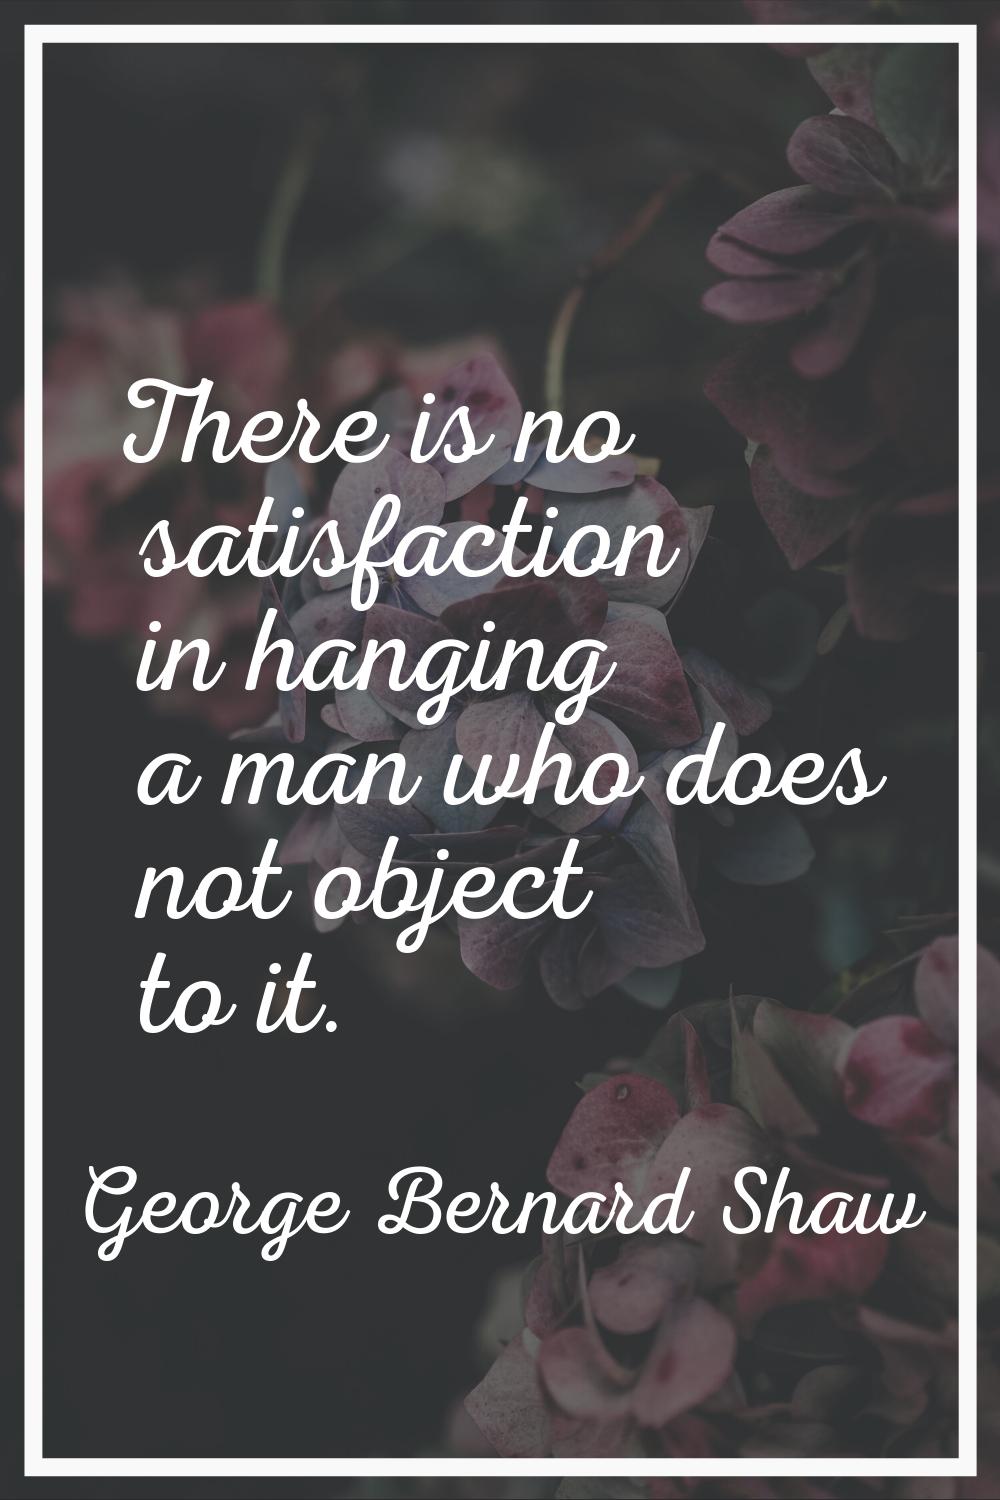 There is no satisfaction in hanging a man who does not object to it.